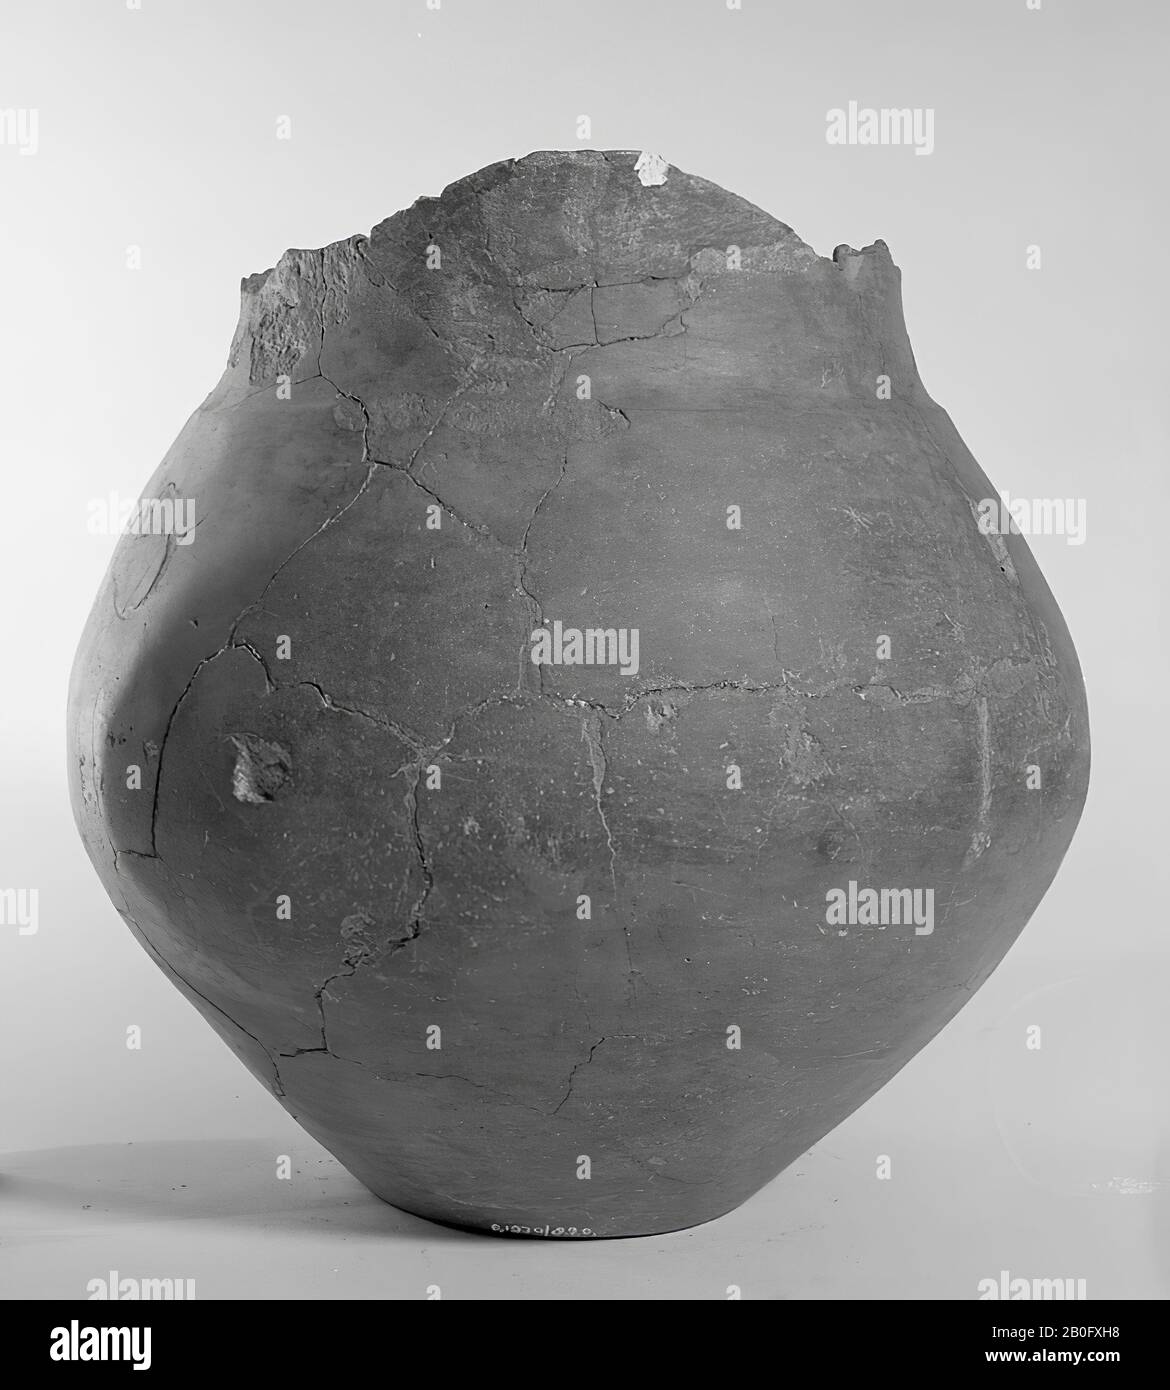 Hallstatturn of earthenware of particularly faint shape. Rand is missing. Old bondings and additions, surface damage. Contains cremated residues, urn, earthenware, h: 23 cm, diam: 23 cm, prehistory -800 Stock Photo